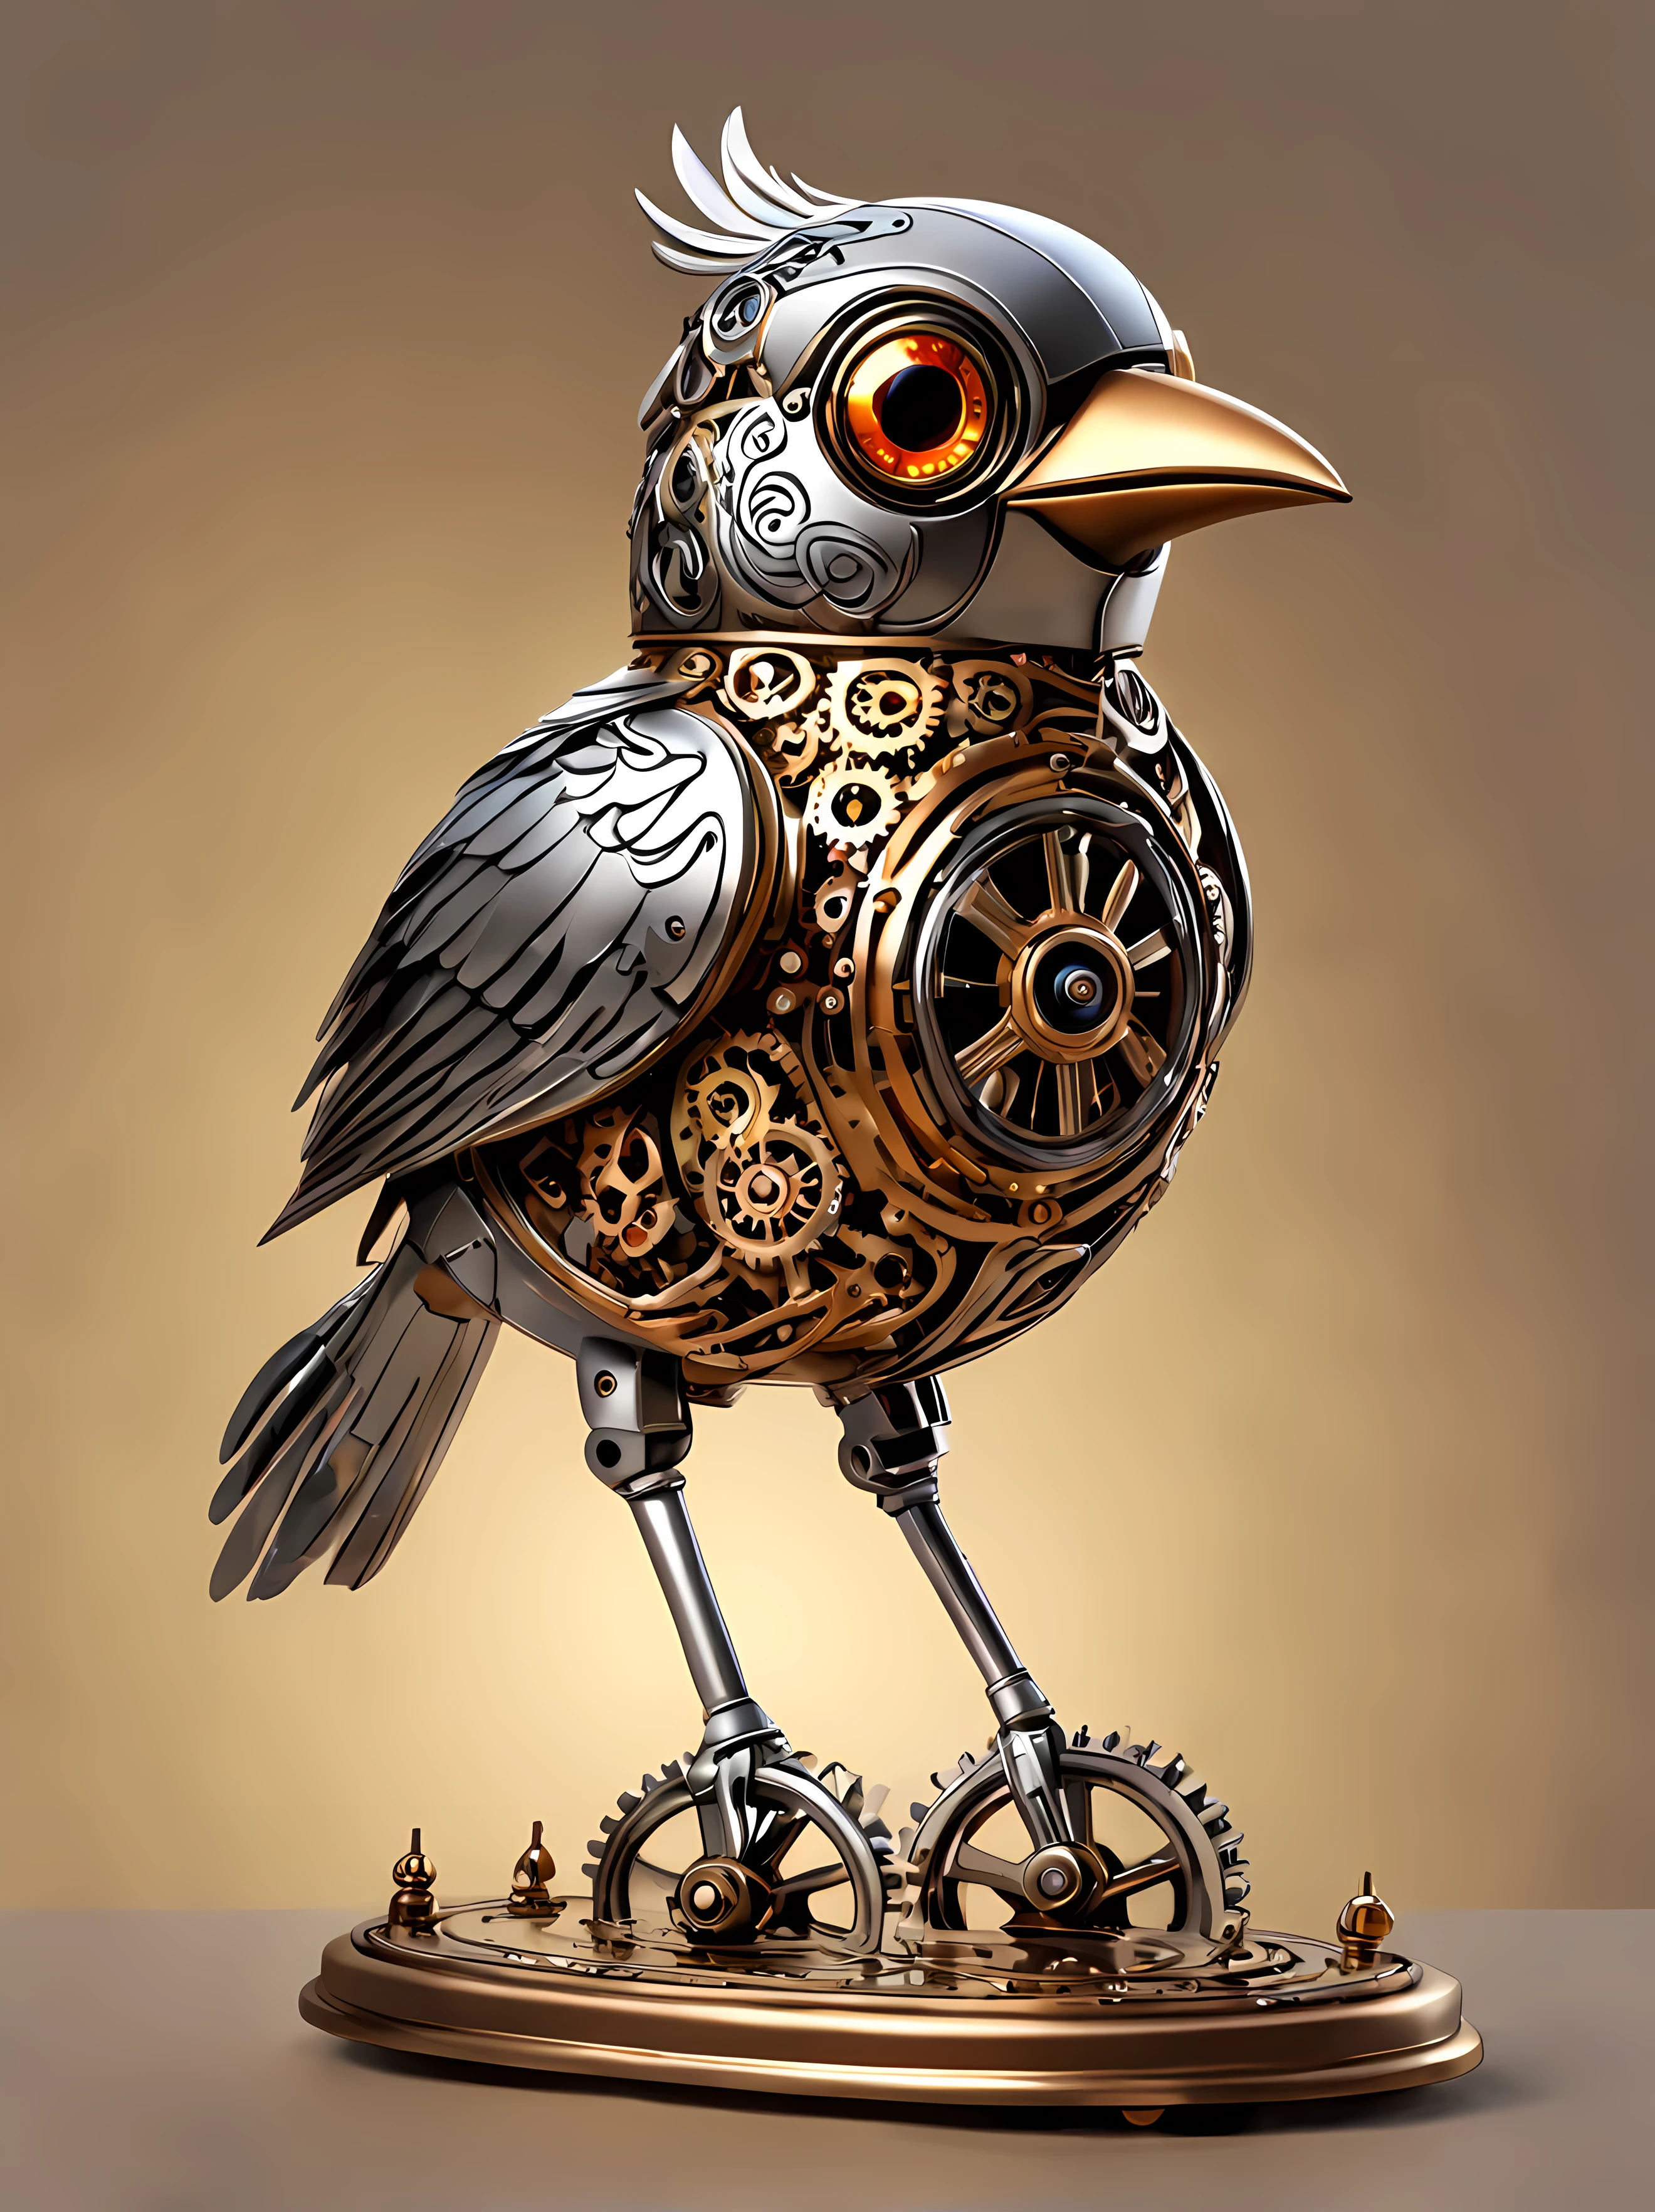 Full shot, cute cartoon style, design a mesmerizing mechanical Automaton representing the air element, polished metal body, delicate mechanical wings, subtle glowing LED lights, light blue intricate design, elegant, masterpiece in maximum 16K resolution, superb quality. | ((More_Detail))